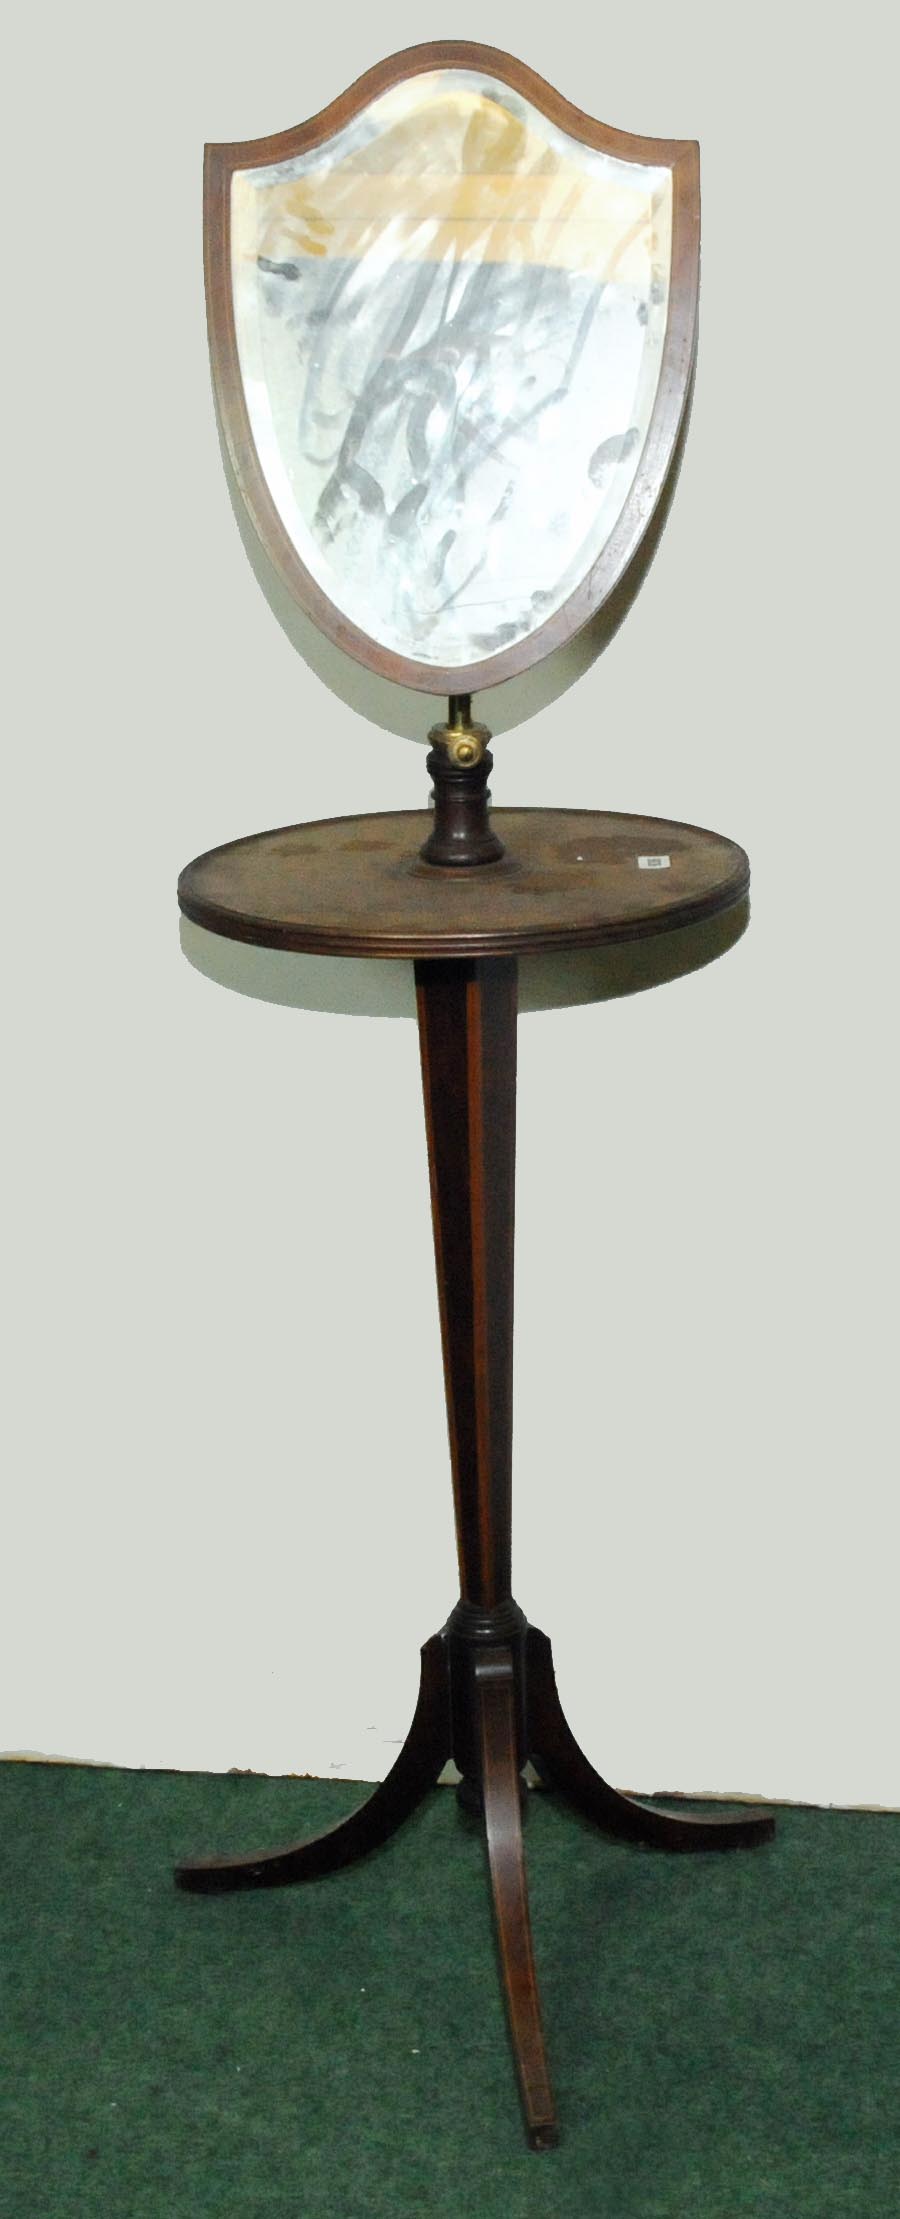 Late 19th century mahogany shaving table with shield shape adjustable mirror above circular top on